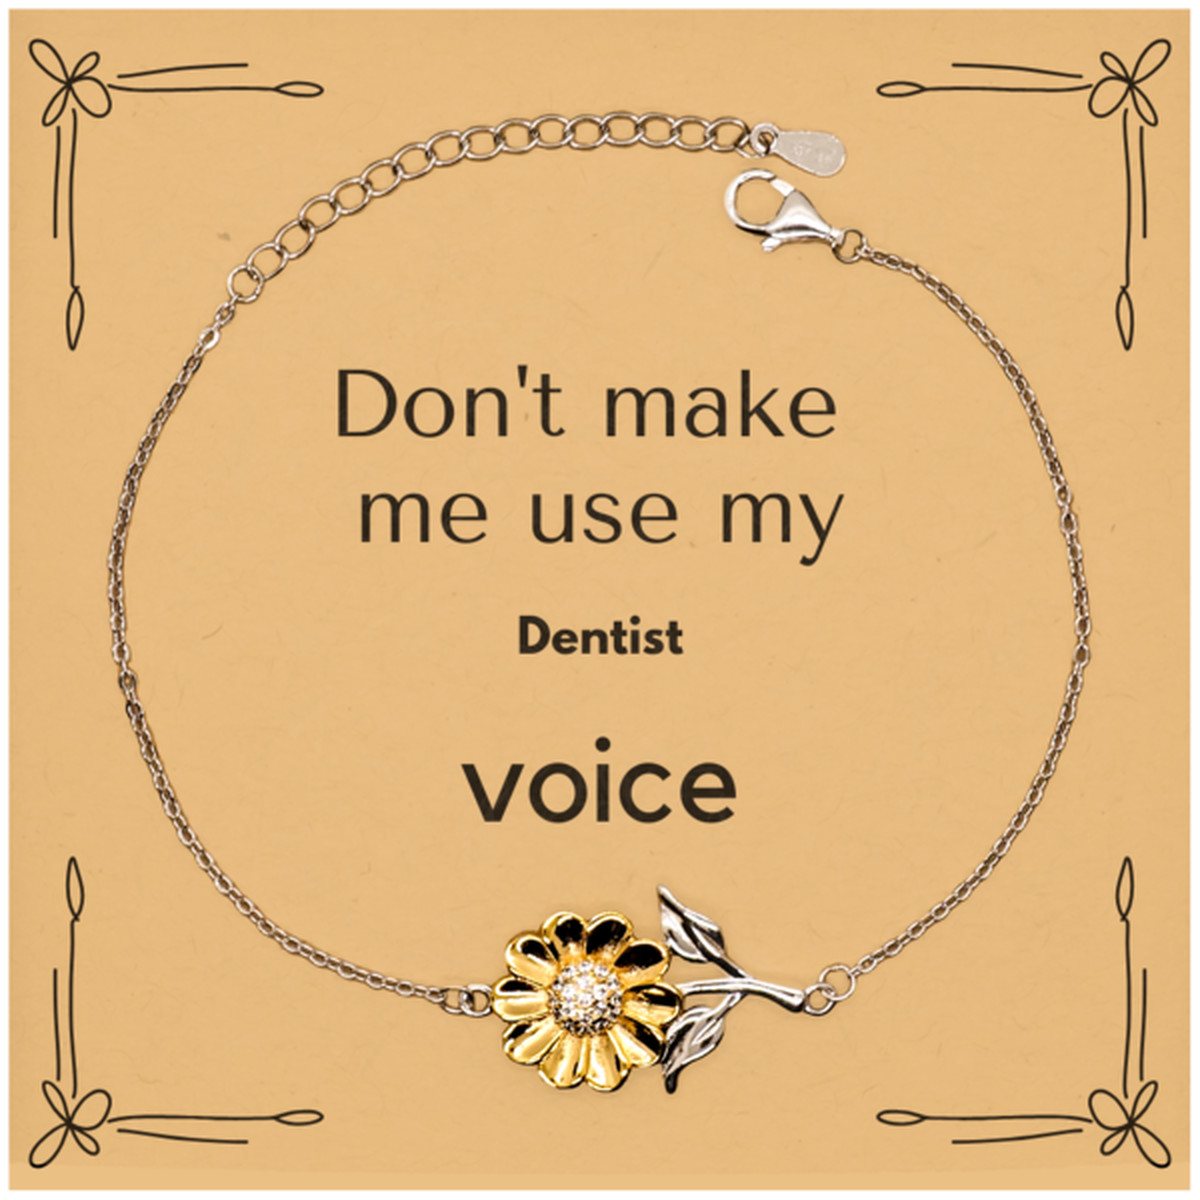 Don't make me use my Dentist voice, Sarcasm Dentist Card Gifts, Christmas Dentist Sunflower Bracelet Birthday Unique Gifts For Dentist Coworkers, Men, Women, Colleague, Friends